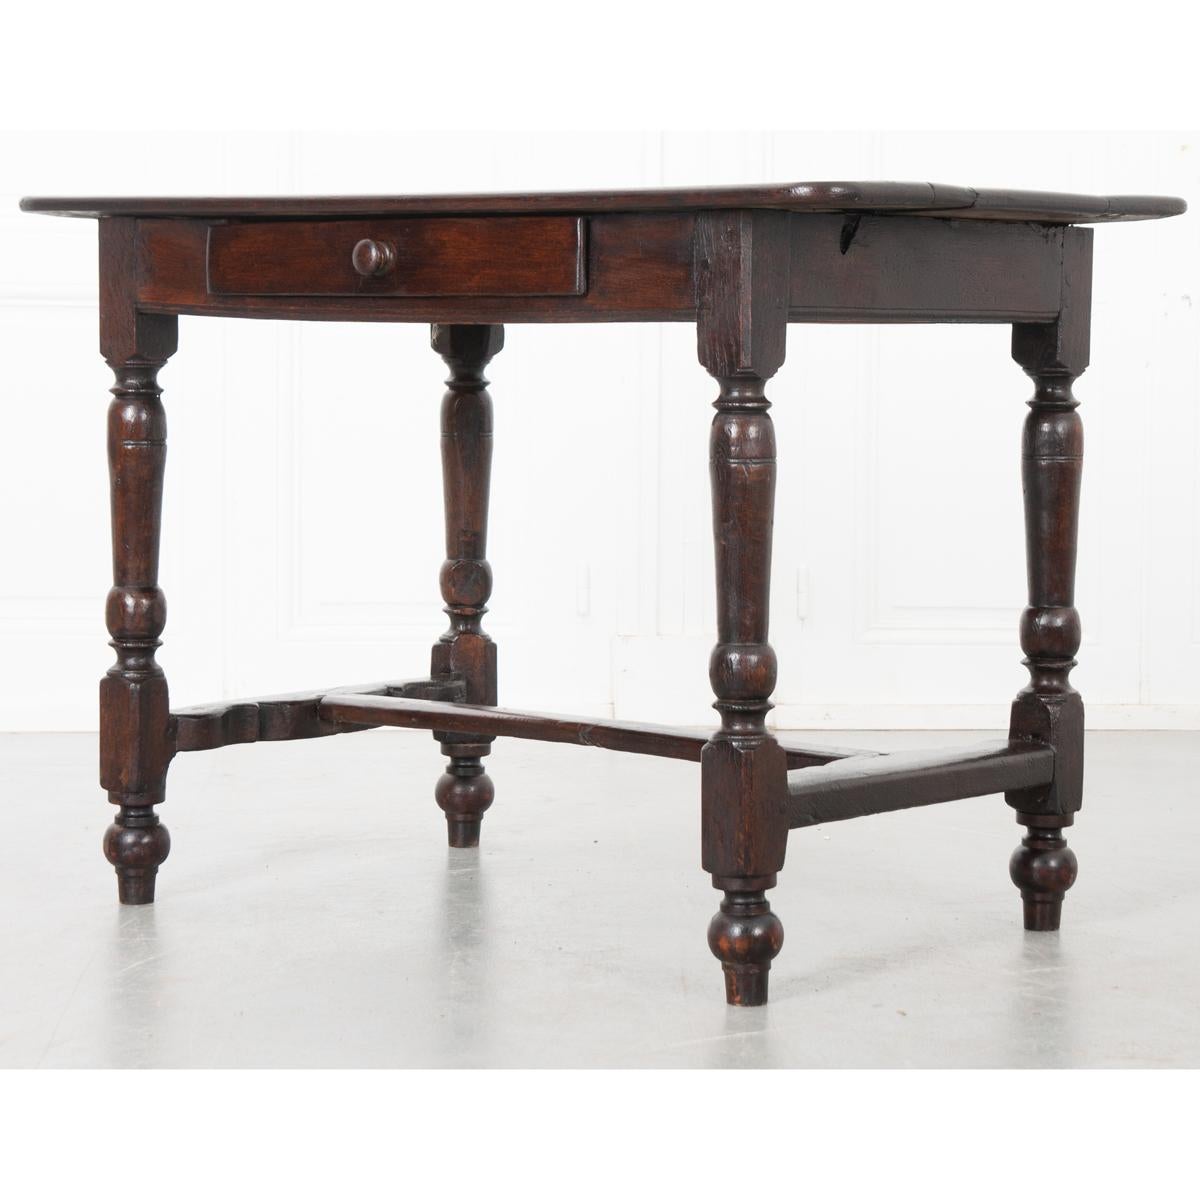 This is a French 19th century oak center table. The desk is put together with wood pegs. There are three wide boards across the top that rest on the apron, which has a single drawer with a wood knob. Turned legs support this piece and are connected